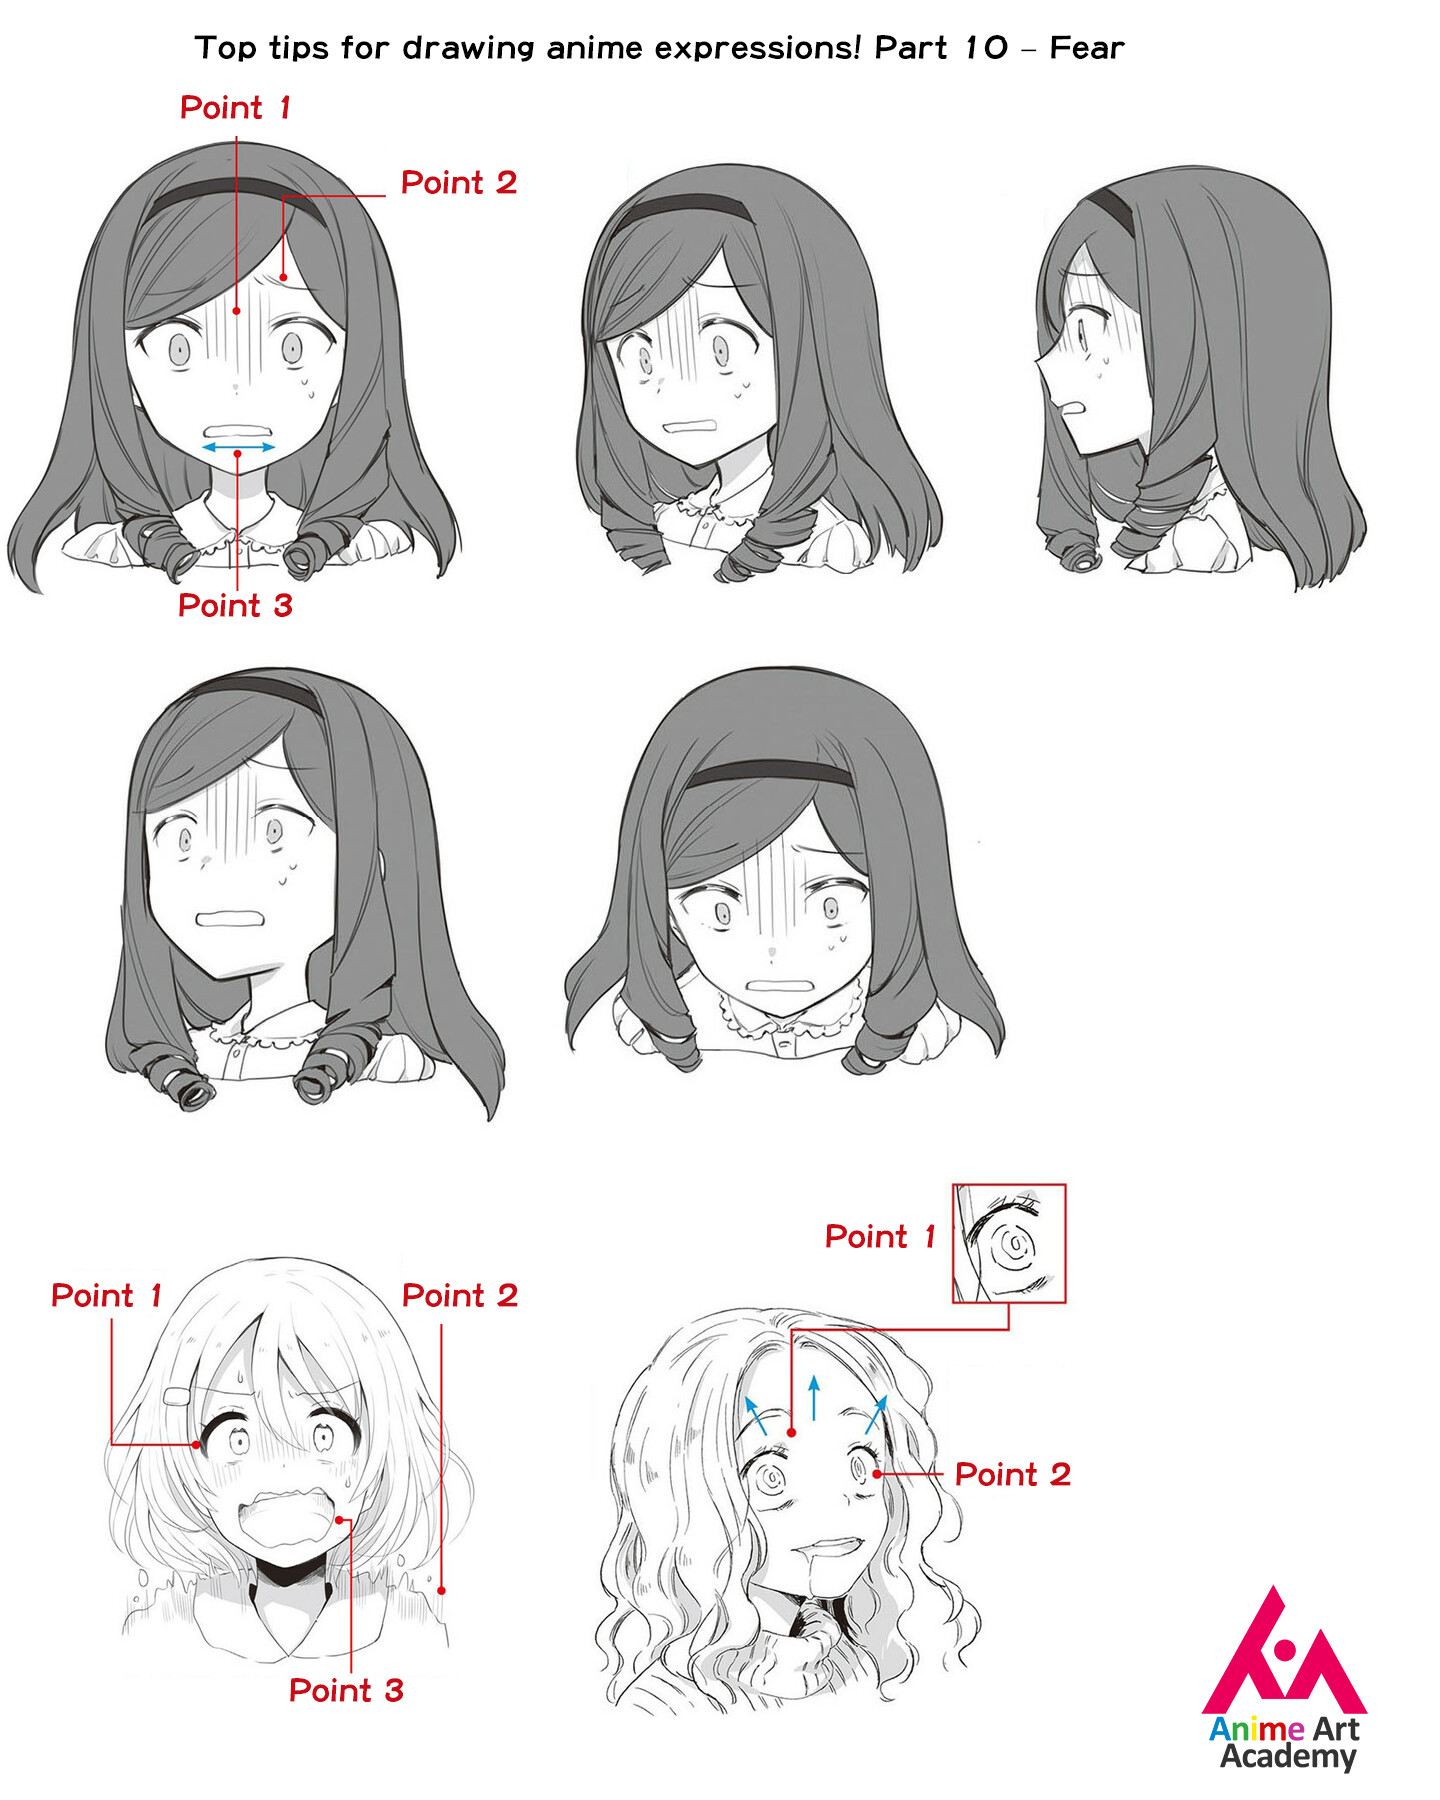 ArtStation - Top tips for drawing anime expressions! Part 10 – Fear